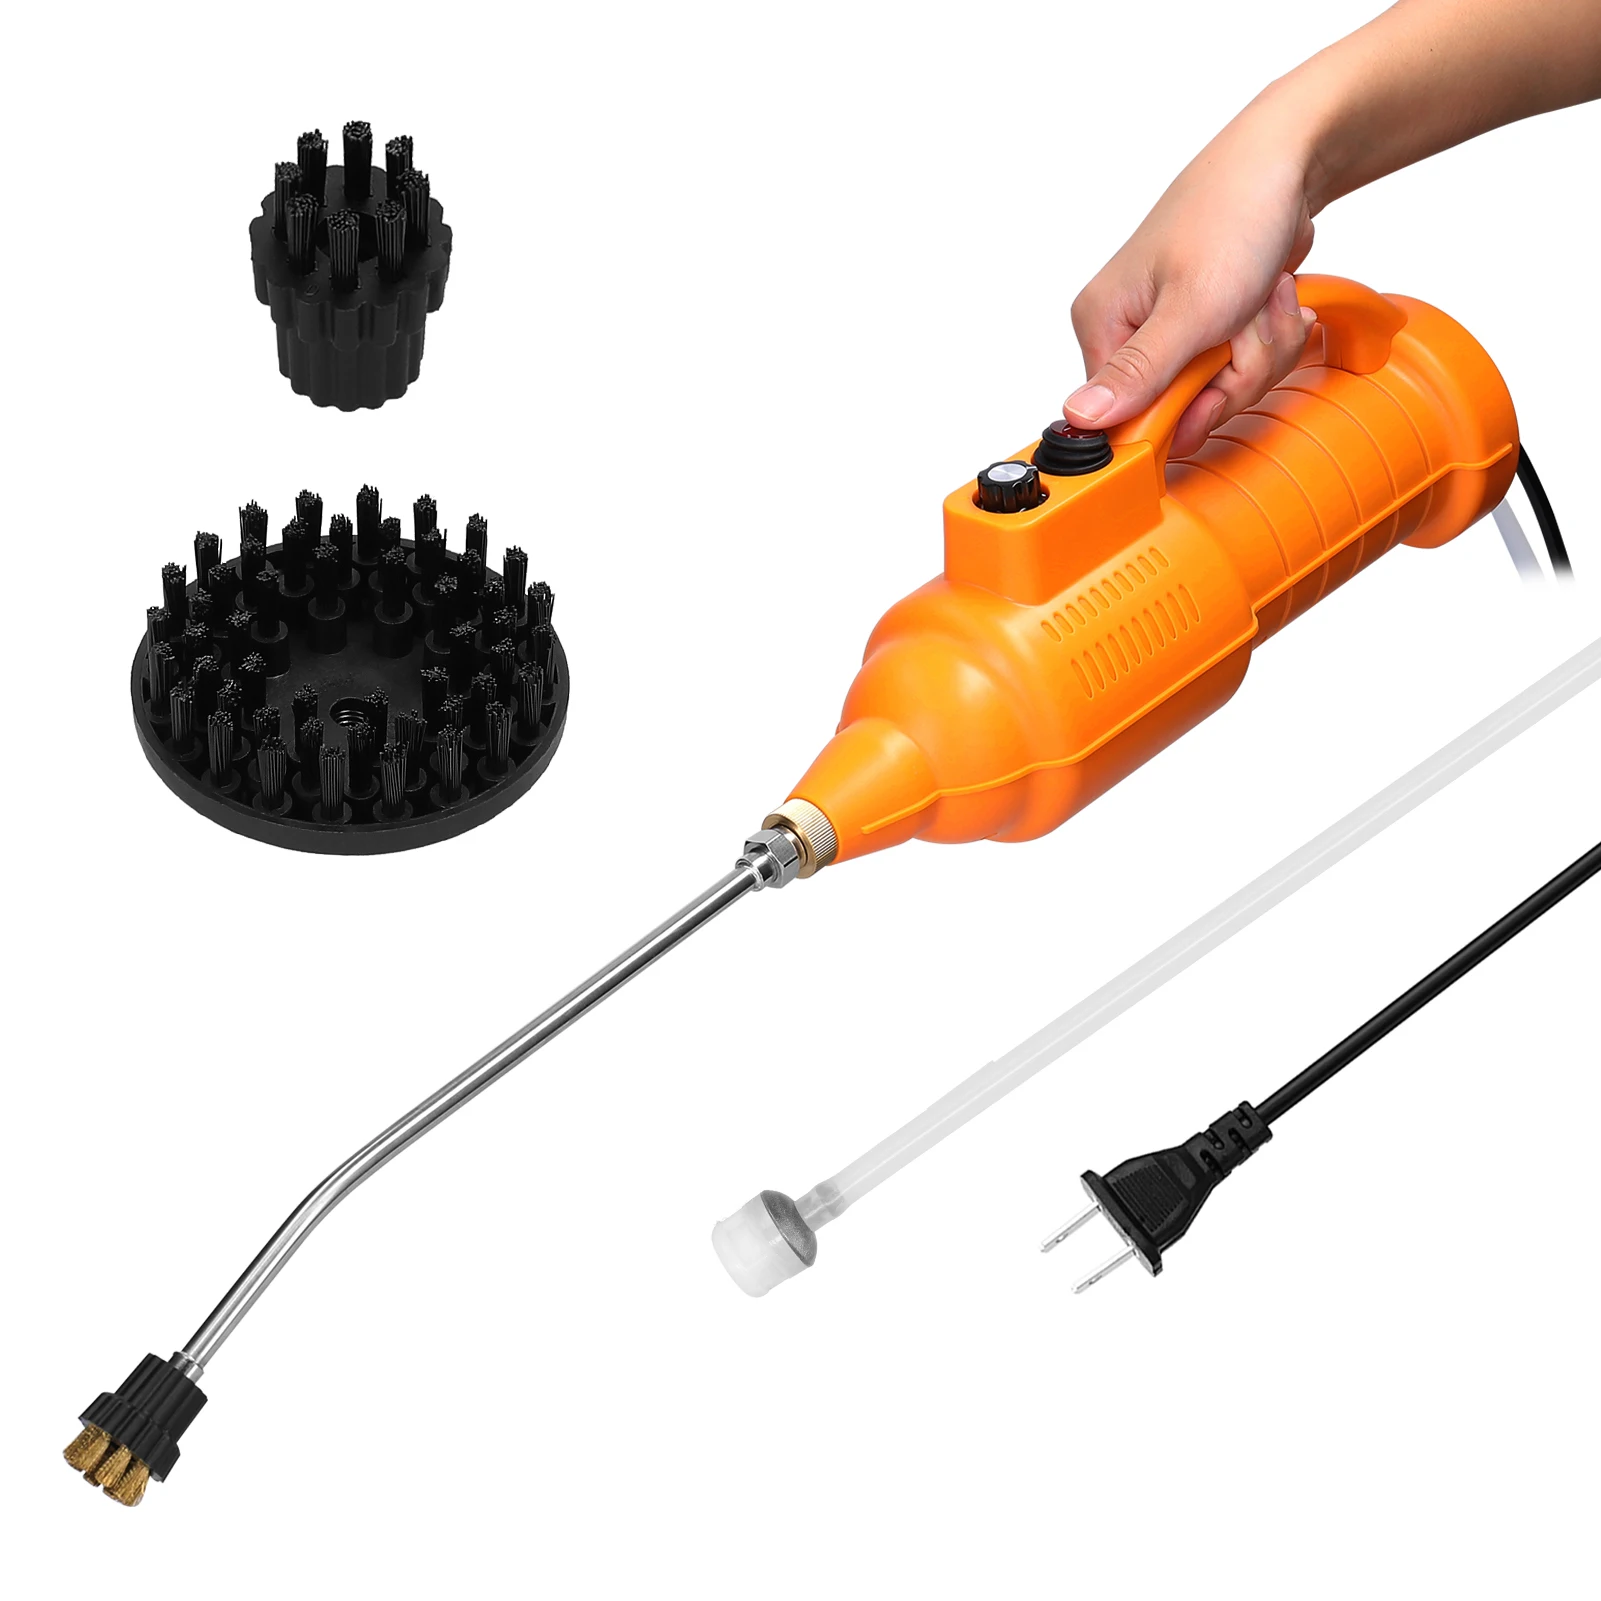 https://ae01.alicdn.com/kf/Sb9814e5a72ac4209a65148d8d860a628G/Household-High-Temperature-Steam-Cleaner-Multifunctional-Cleaning-Machine-for-Air-Conditioner-Car-Kitchen-Tiles-Floors.jpg